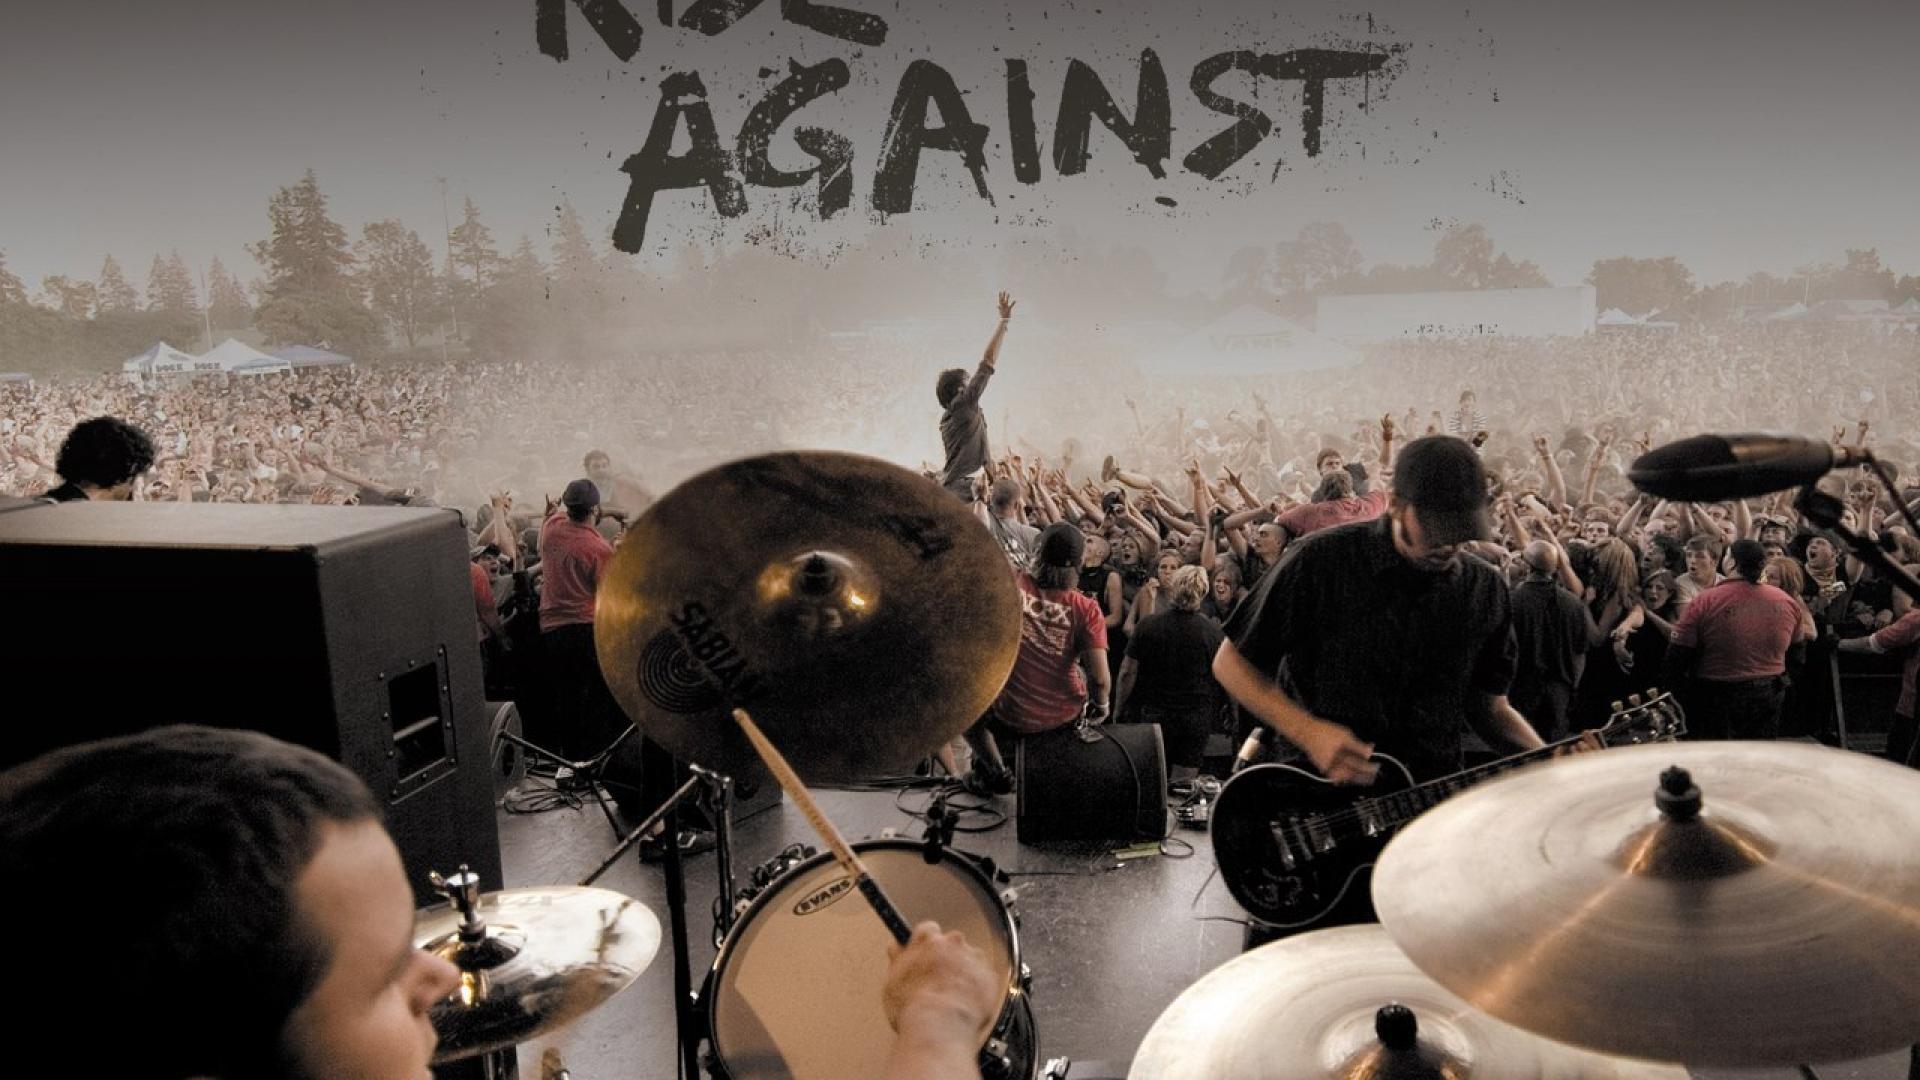 rise against full album the sufferer and the witness